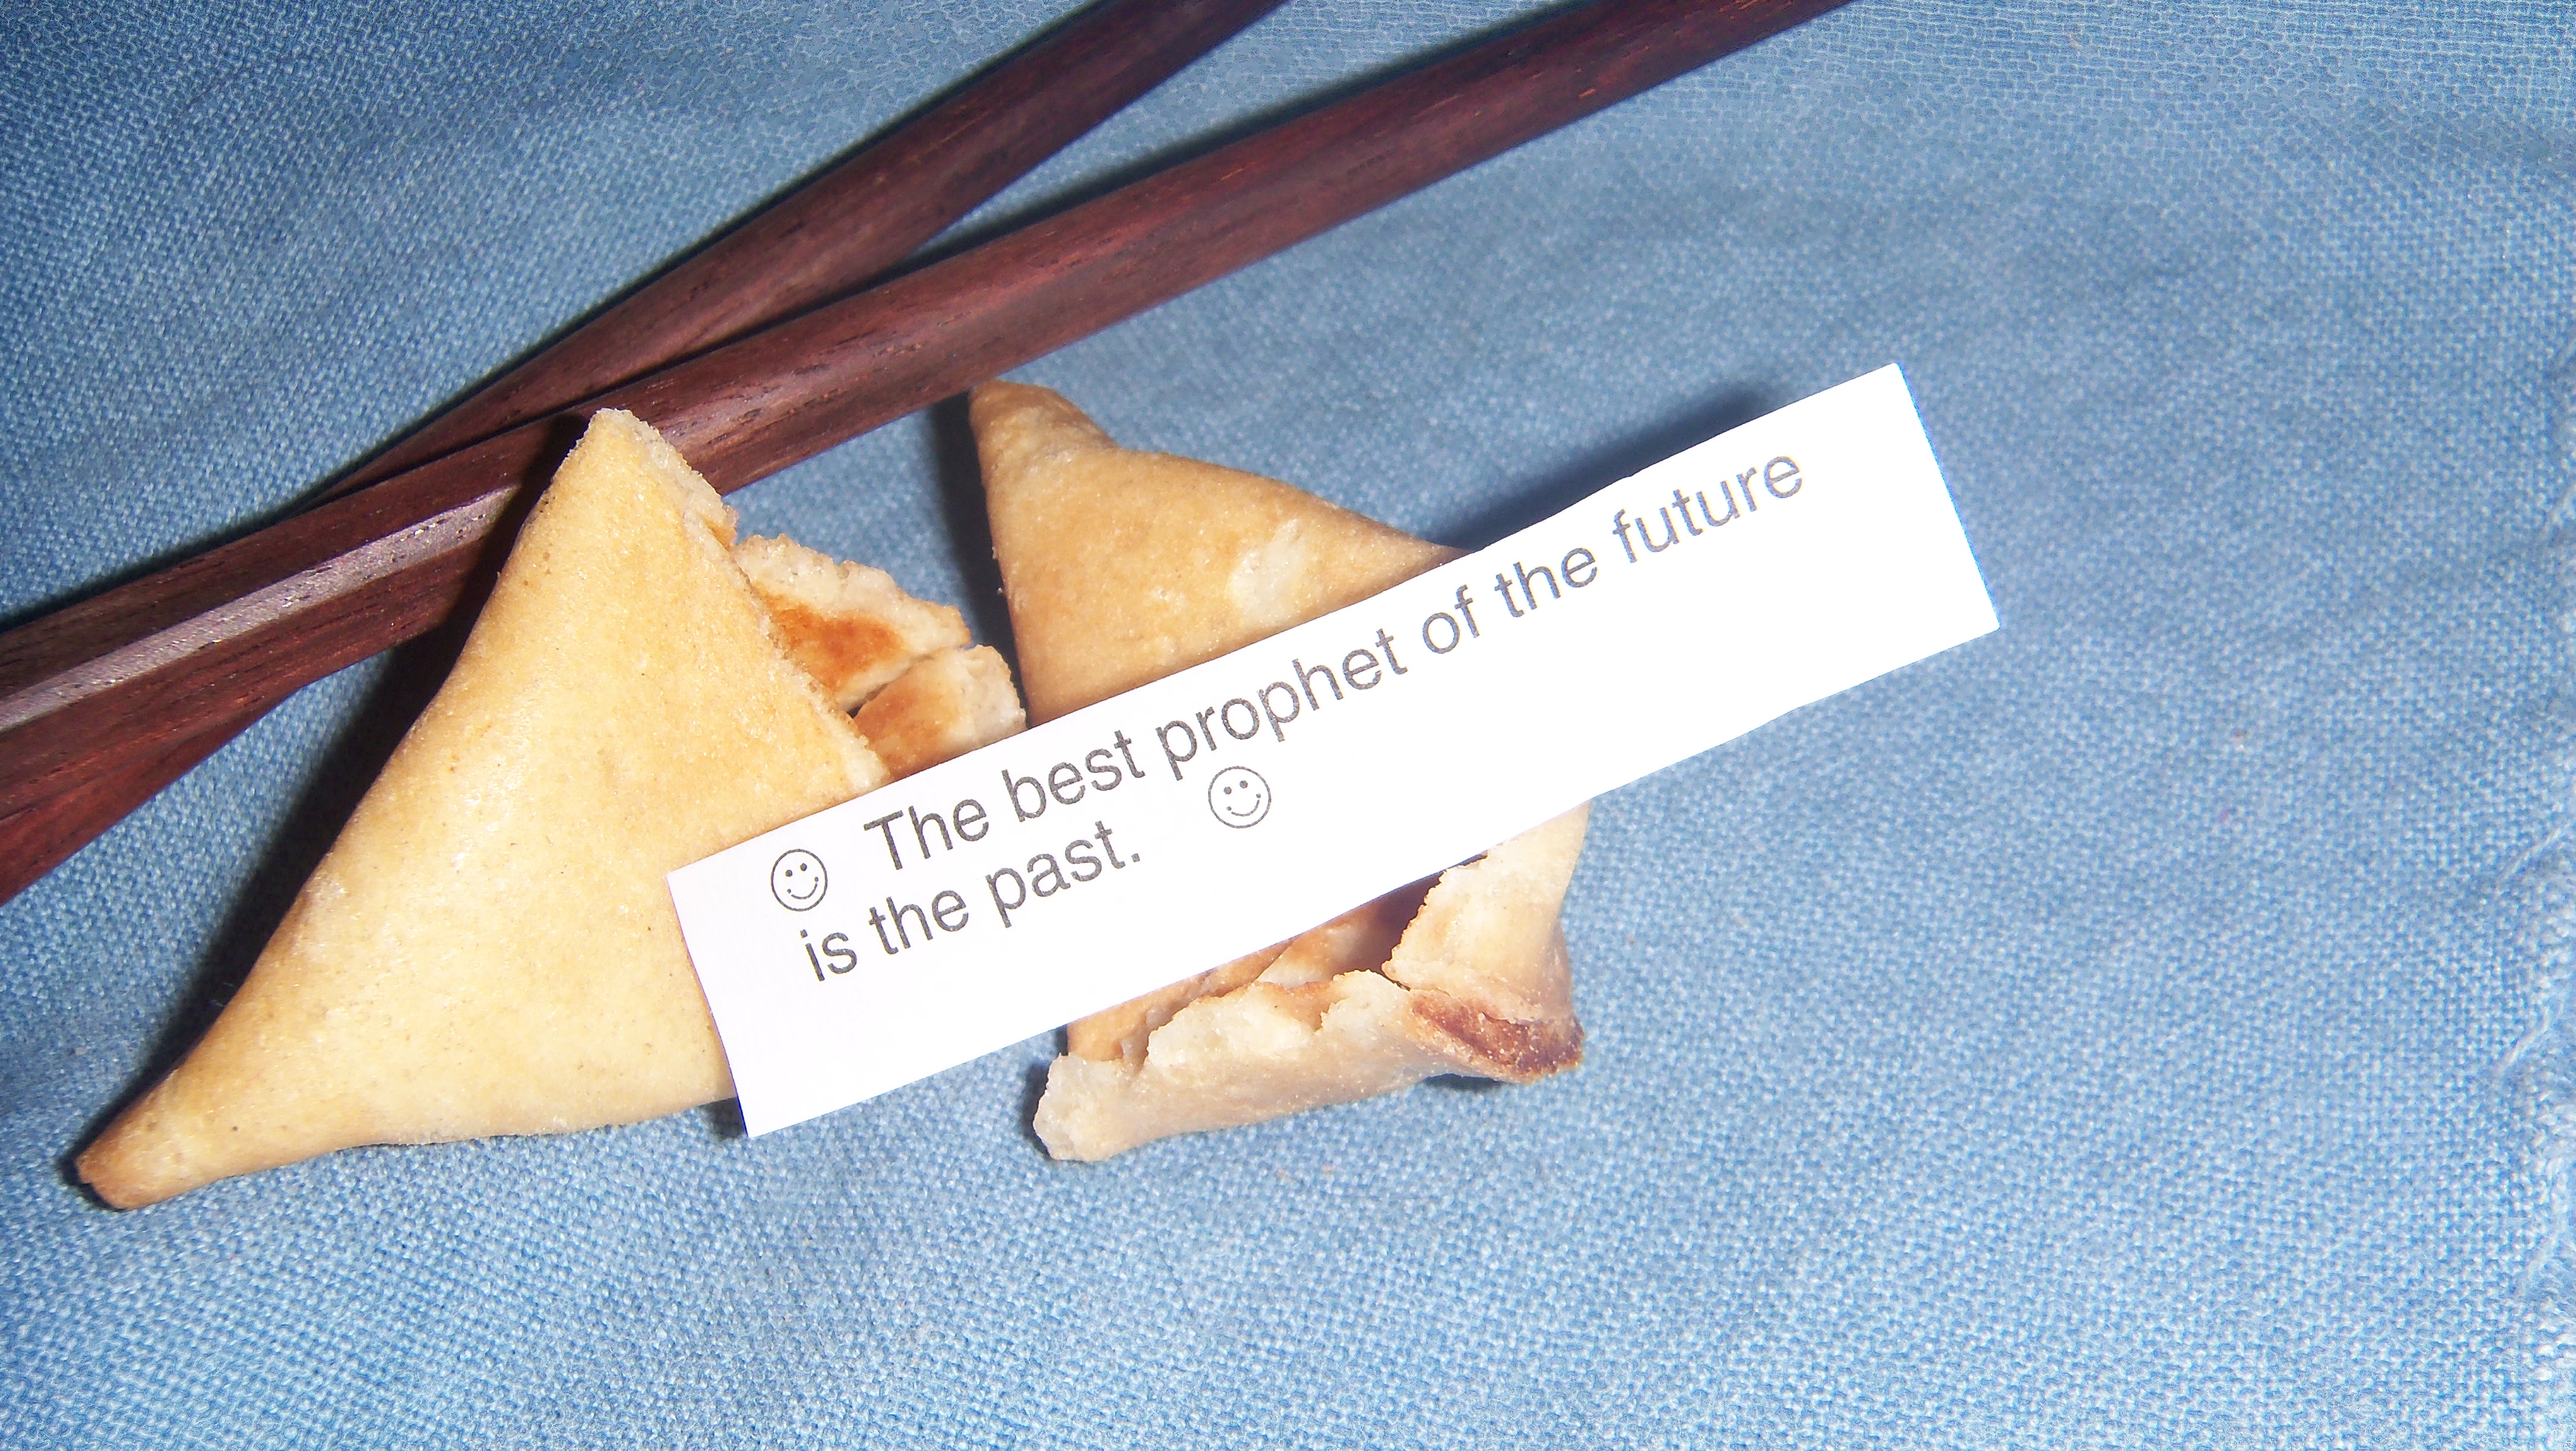 Fortune Cookie Wisdom: The best prophet of the future is the past.